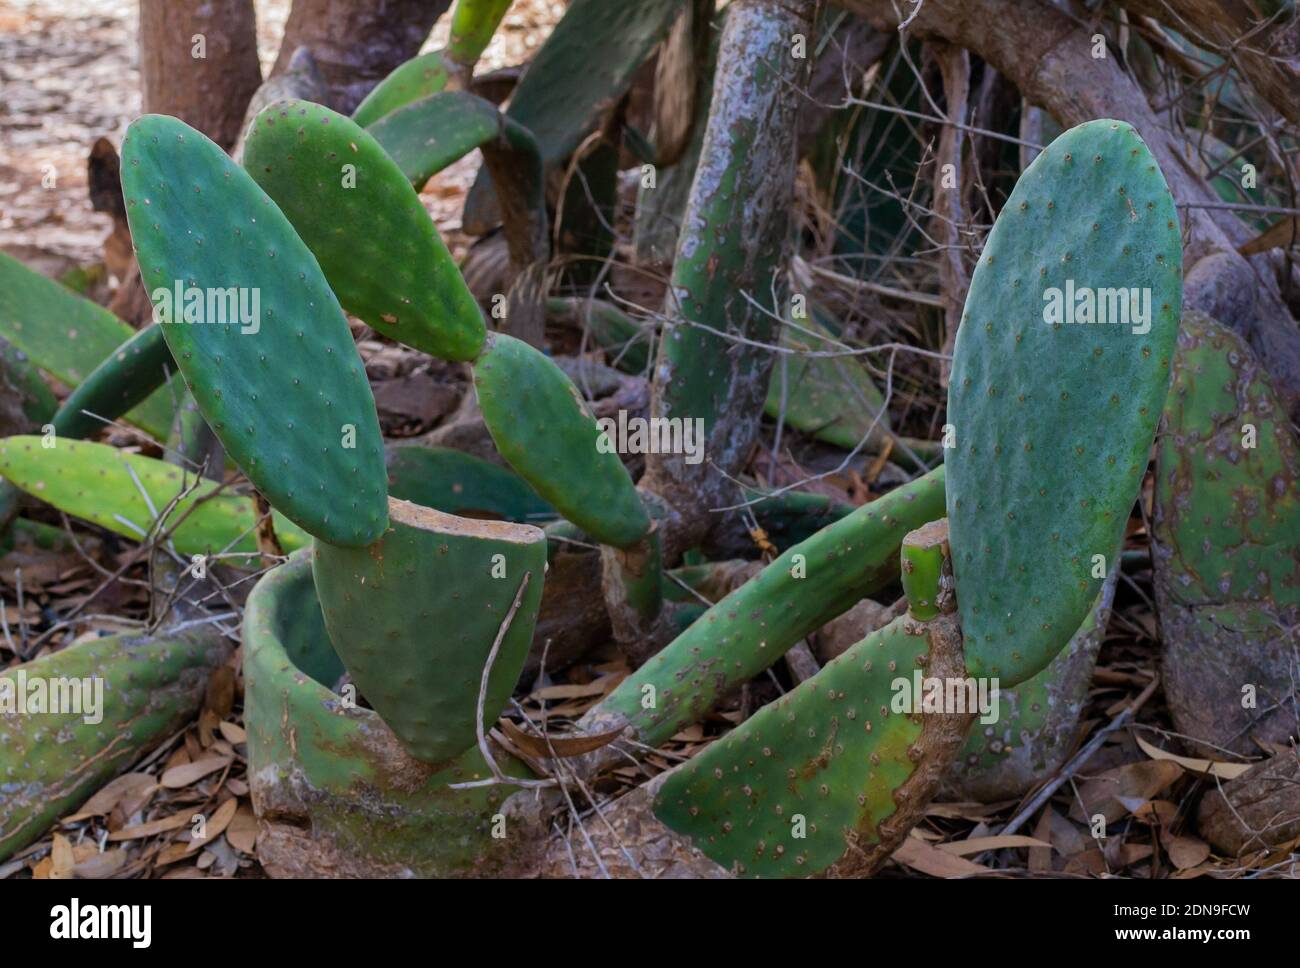 Prickly Pear Cactus with burgundy fruits in Cyprus. Opuntia, ficus-indica, Indian fig opuntia, barbary fig Stock Photo